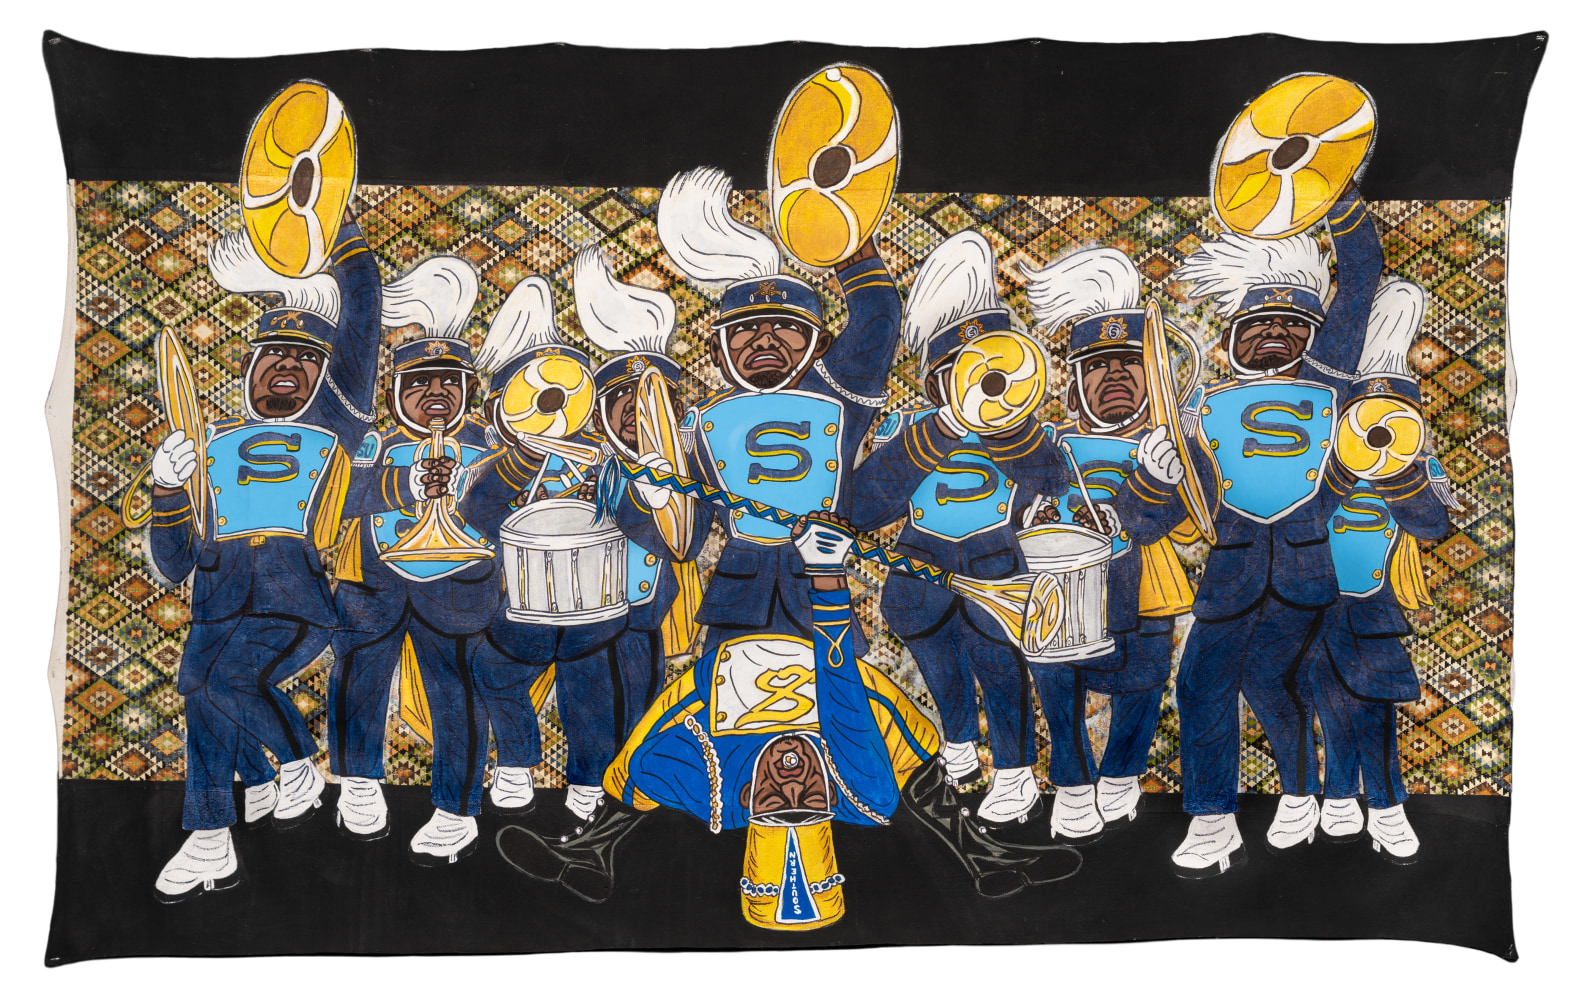 Keith Duncan&amp;nbsp;
Southern University Marching Band, 2020
Acrylic with fabric on canvas
68 x 108 inches